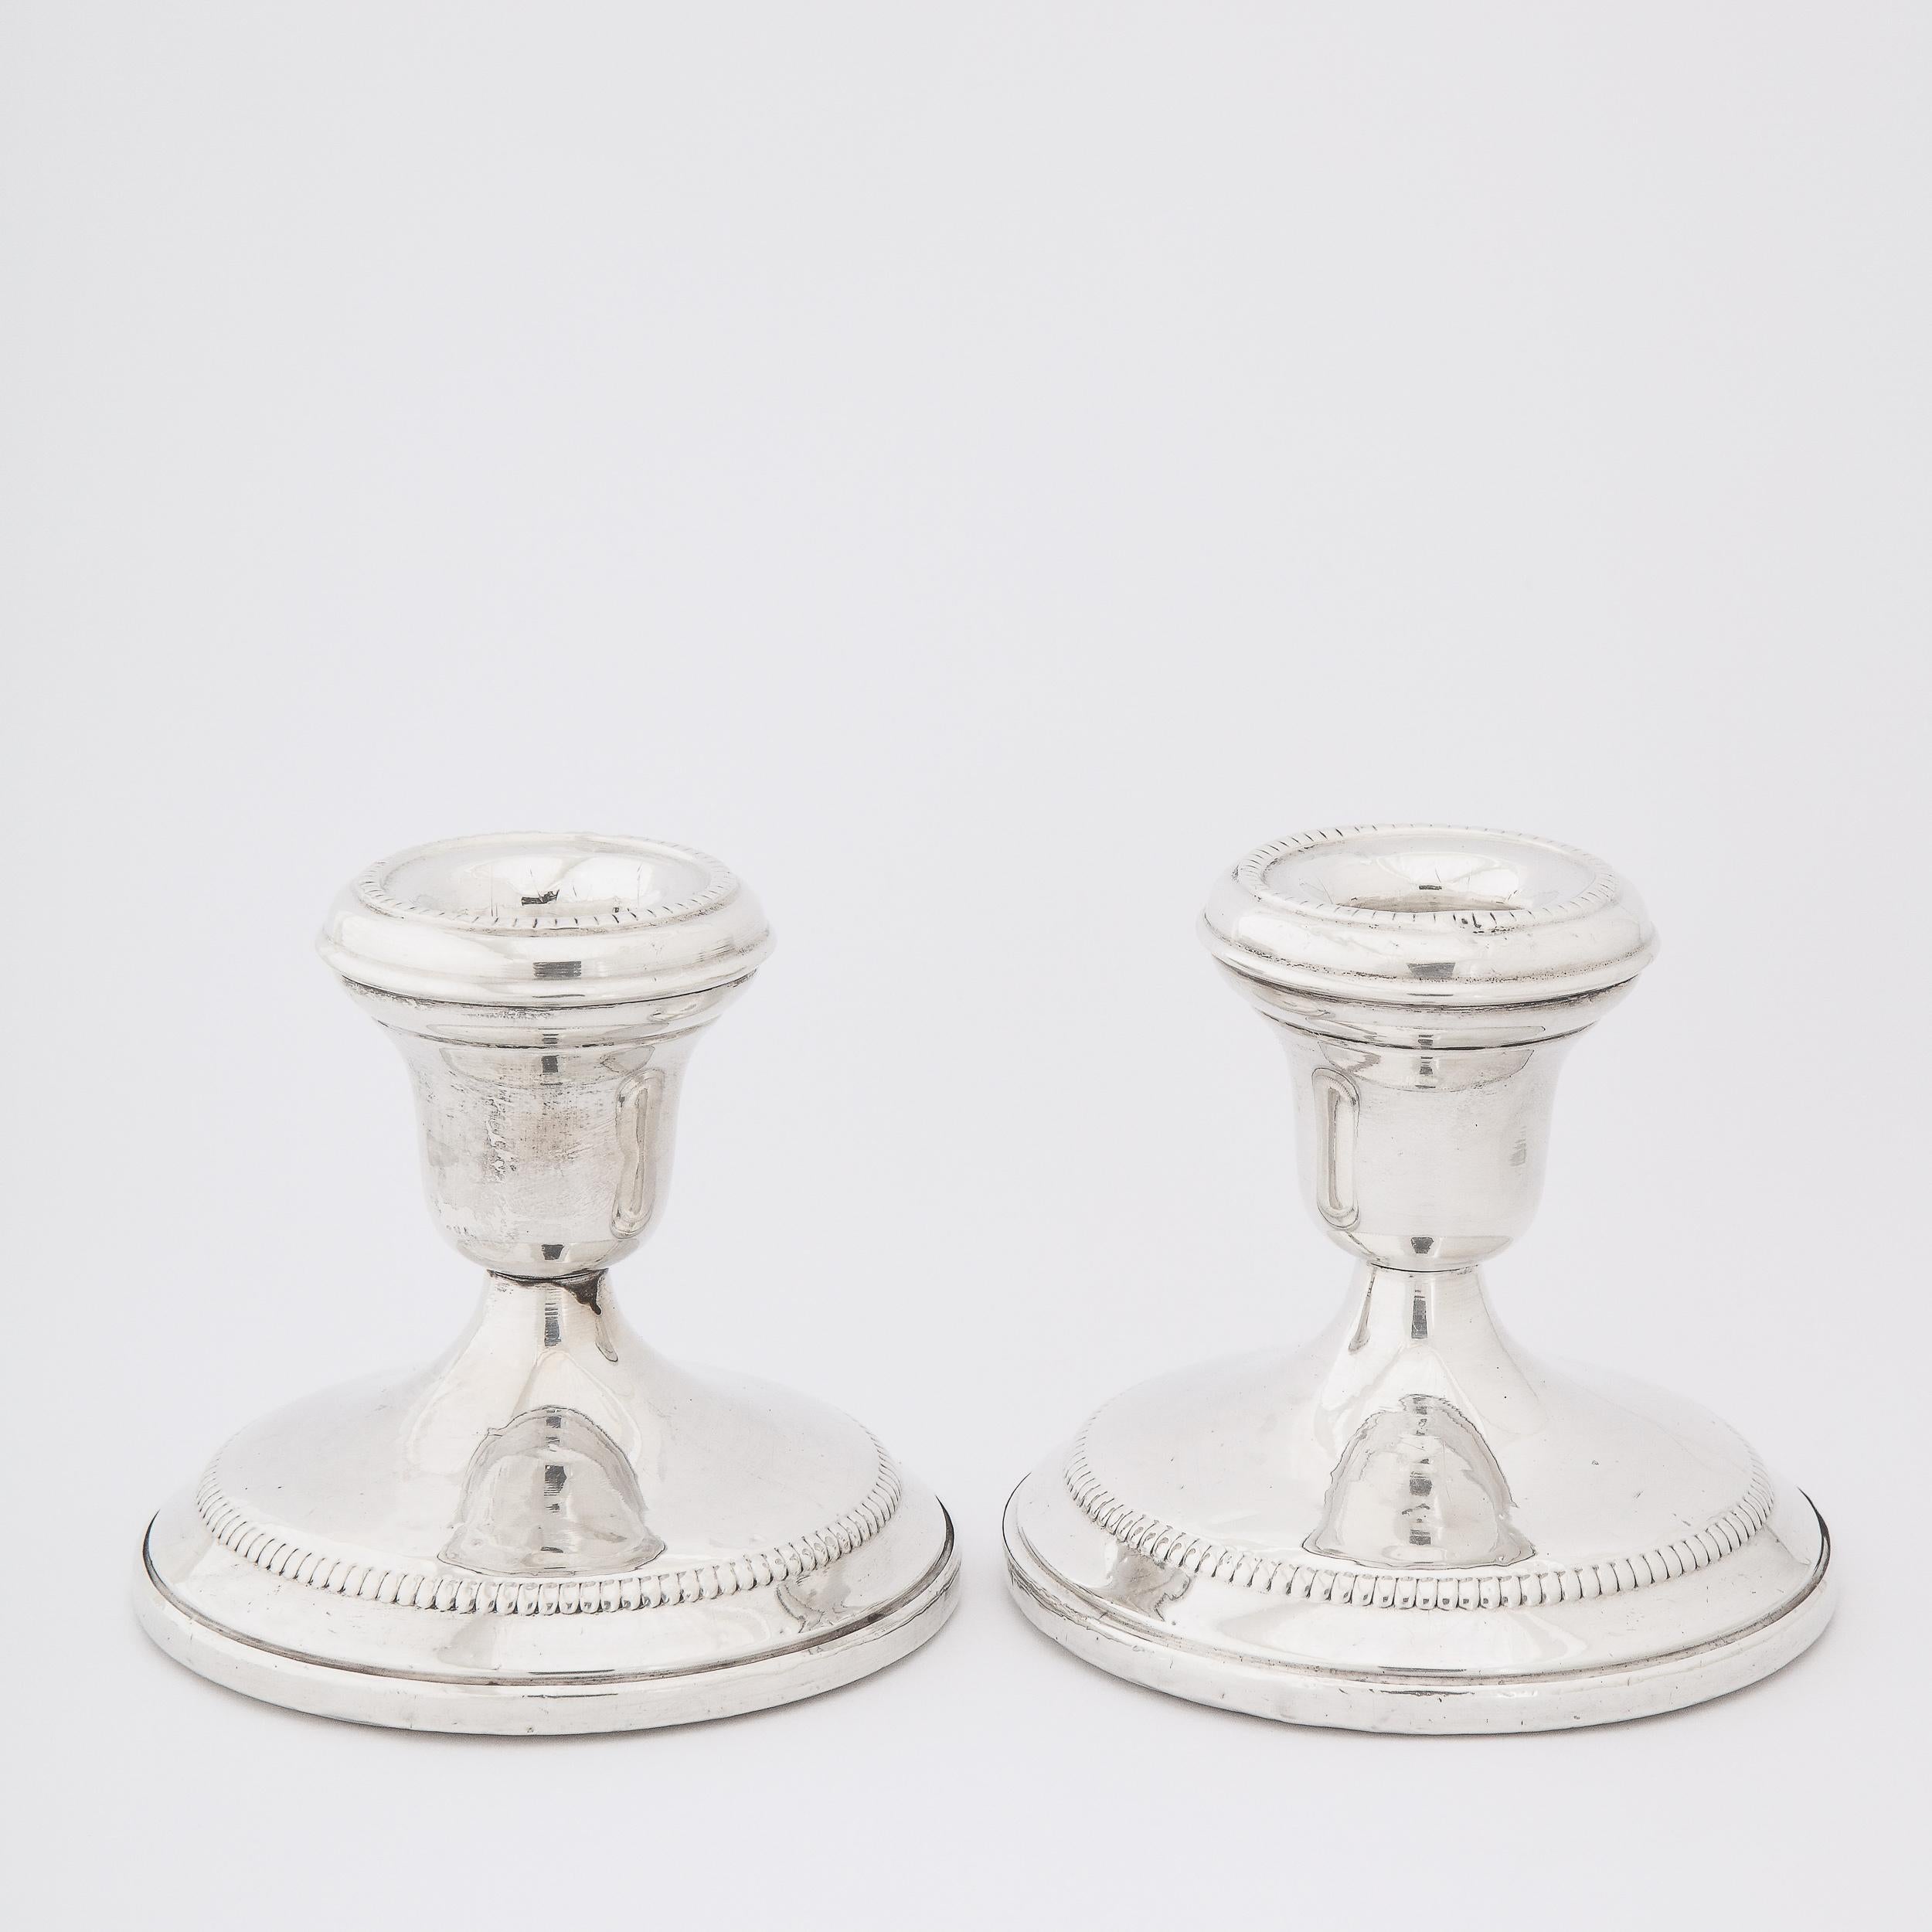 This refined pair of Mid-Century Modern candlesticks were realized in the United States, circa 1960. They feature circular bases that taper upwards to bobeches of the same form- all in lustrous sterling silver. Additionally, there is beaded